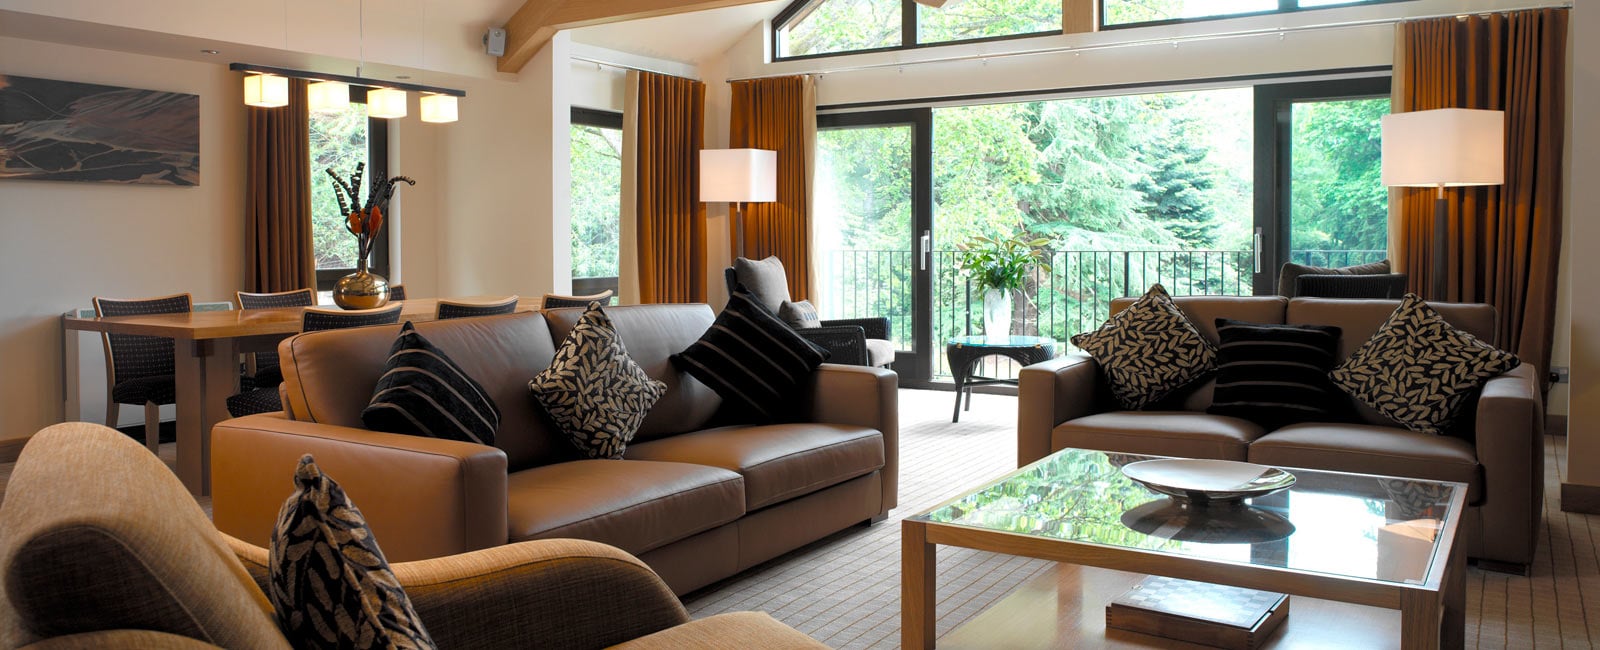 Living Area at Hilton Grand Vacations Club Resort at Dunkeld in Perthshire, Scotland